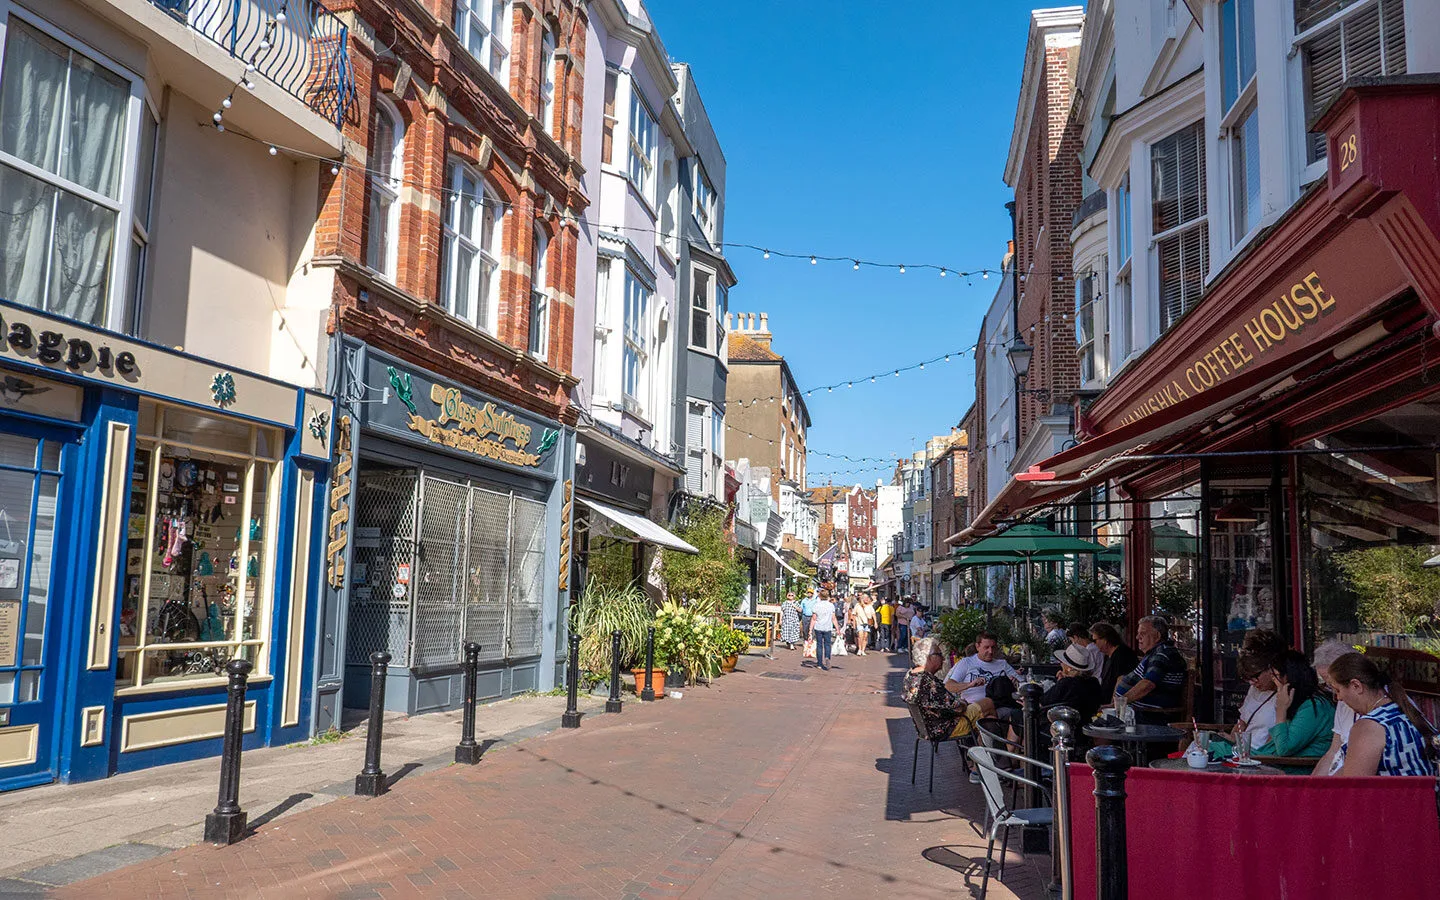 Shops and cafes on George Street in Hastings